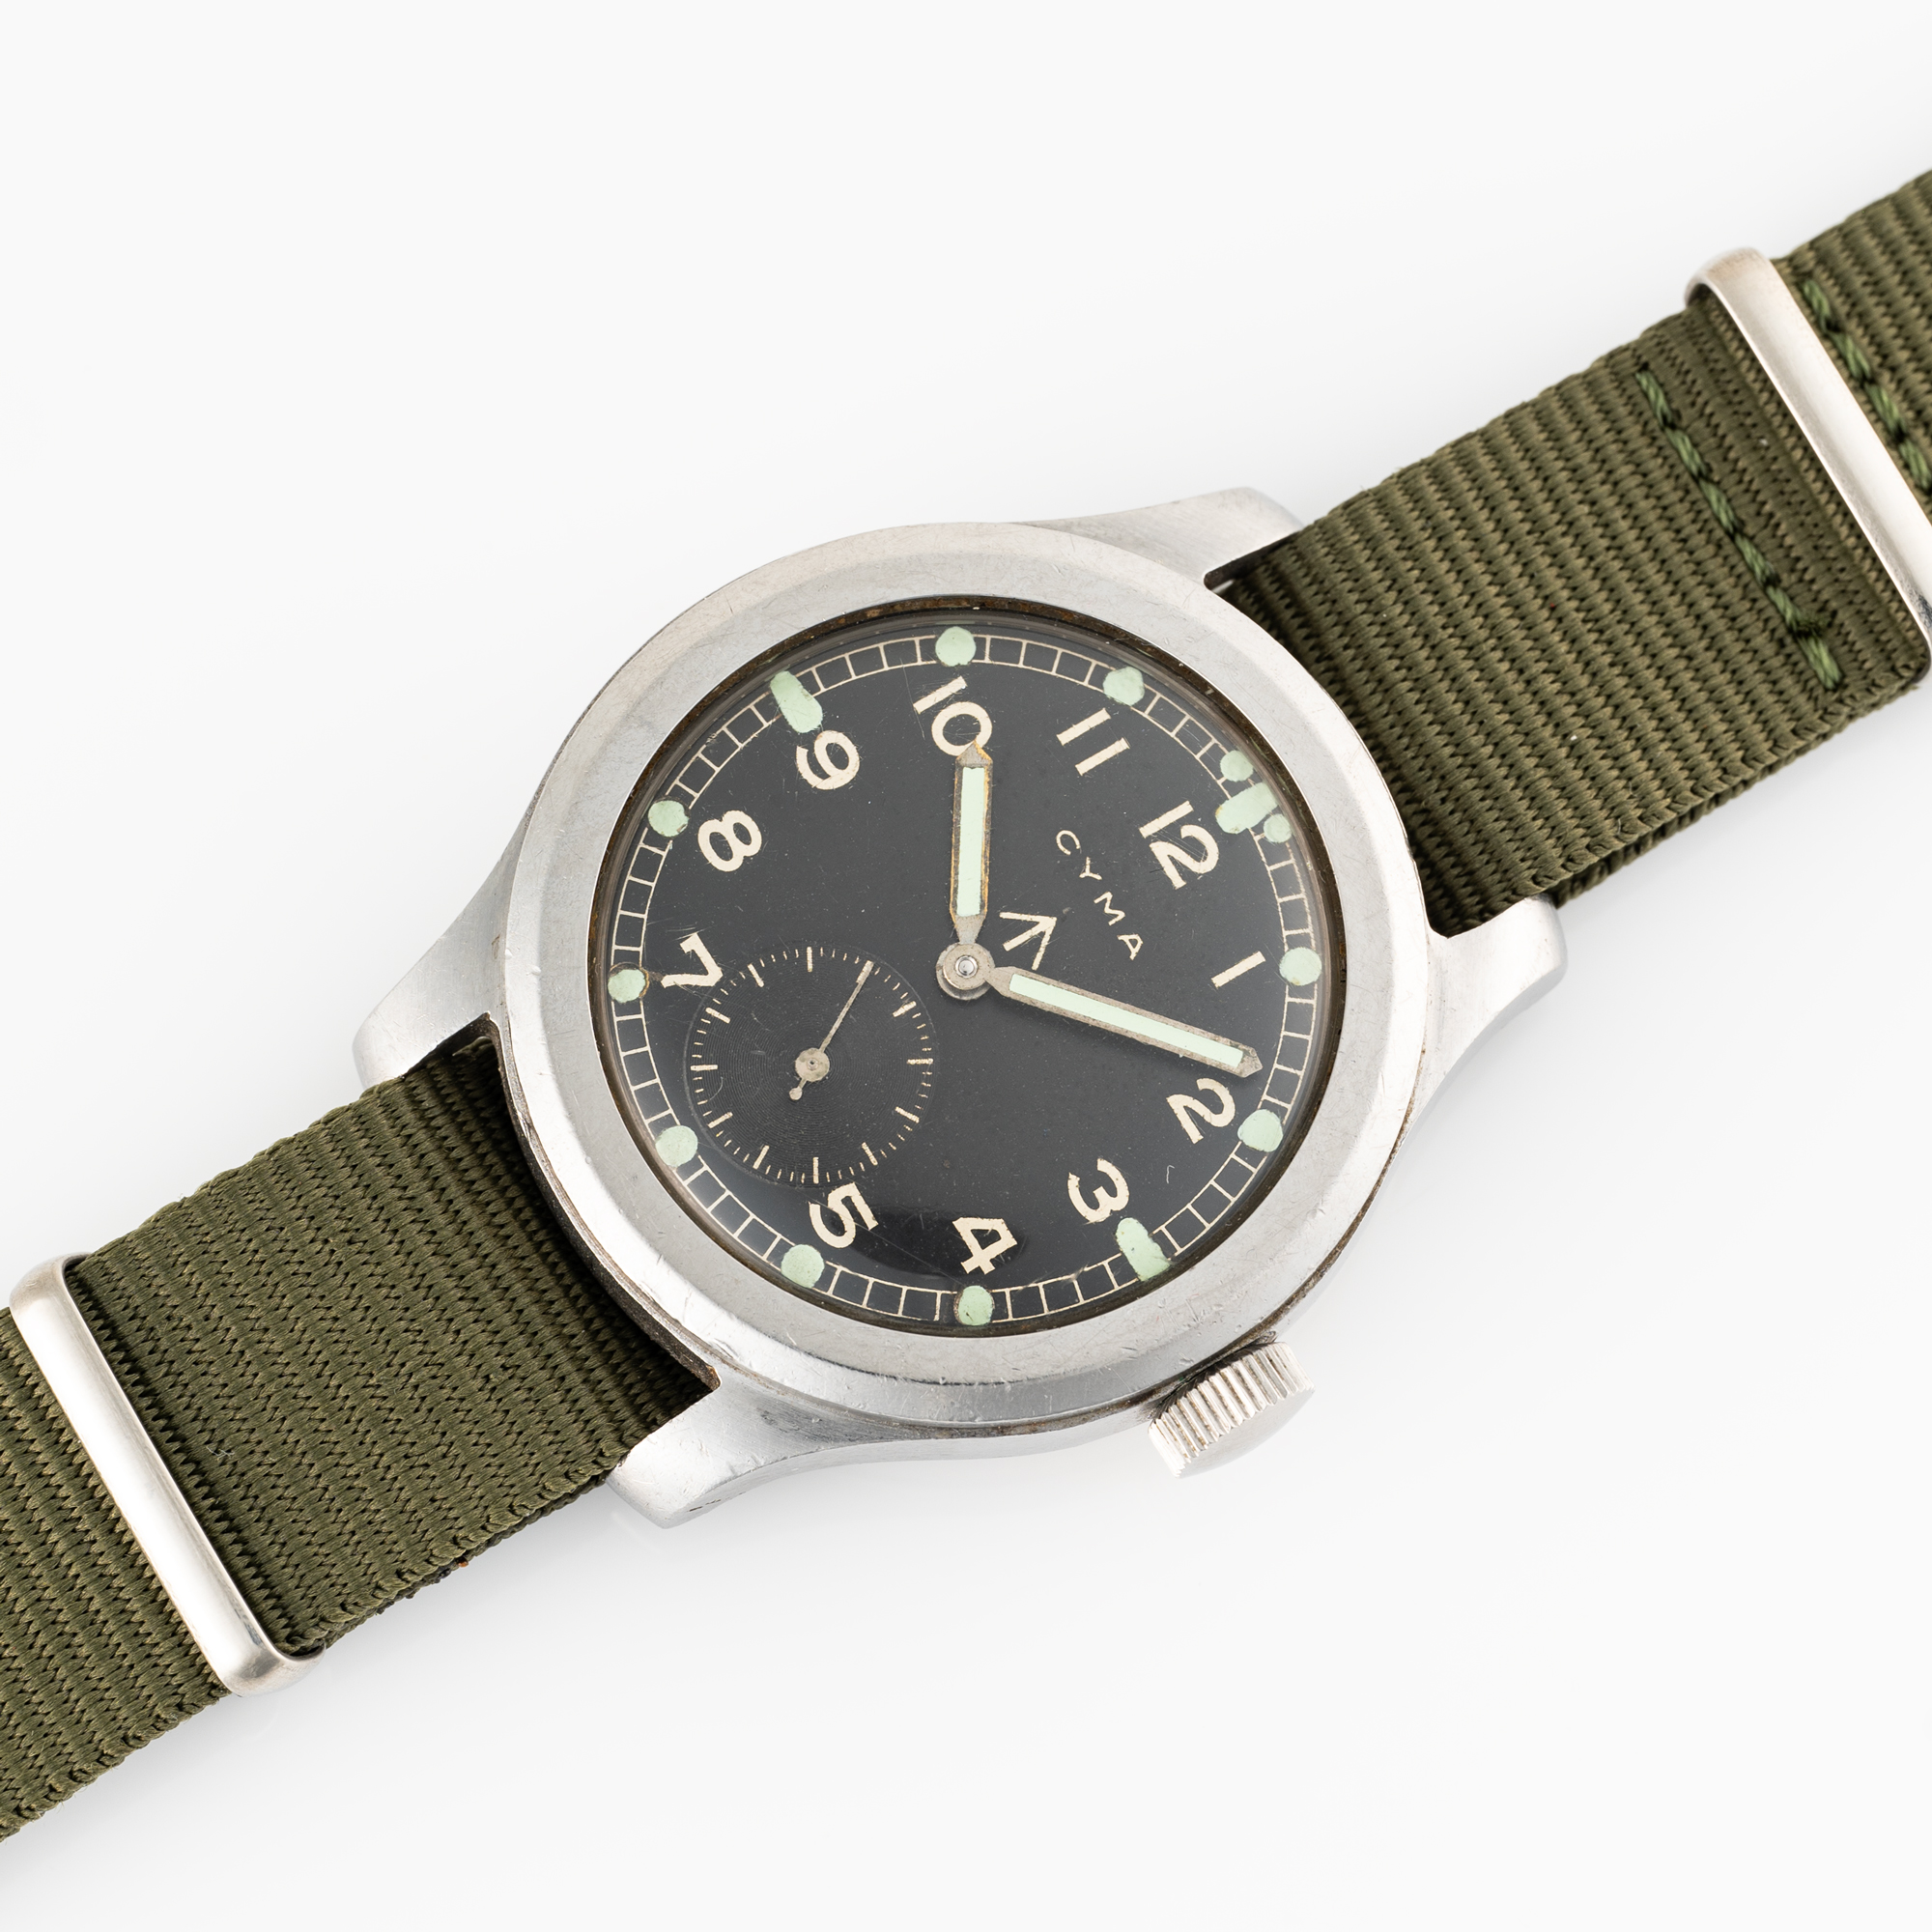 A GENTLEMAN'S STAINLESS STEEL BRITISH MILITARY CYMA W.W.W. WRIST WATCH CIRCA 1945, PART OF THE " - Image 3 of 8